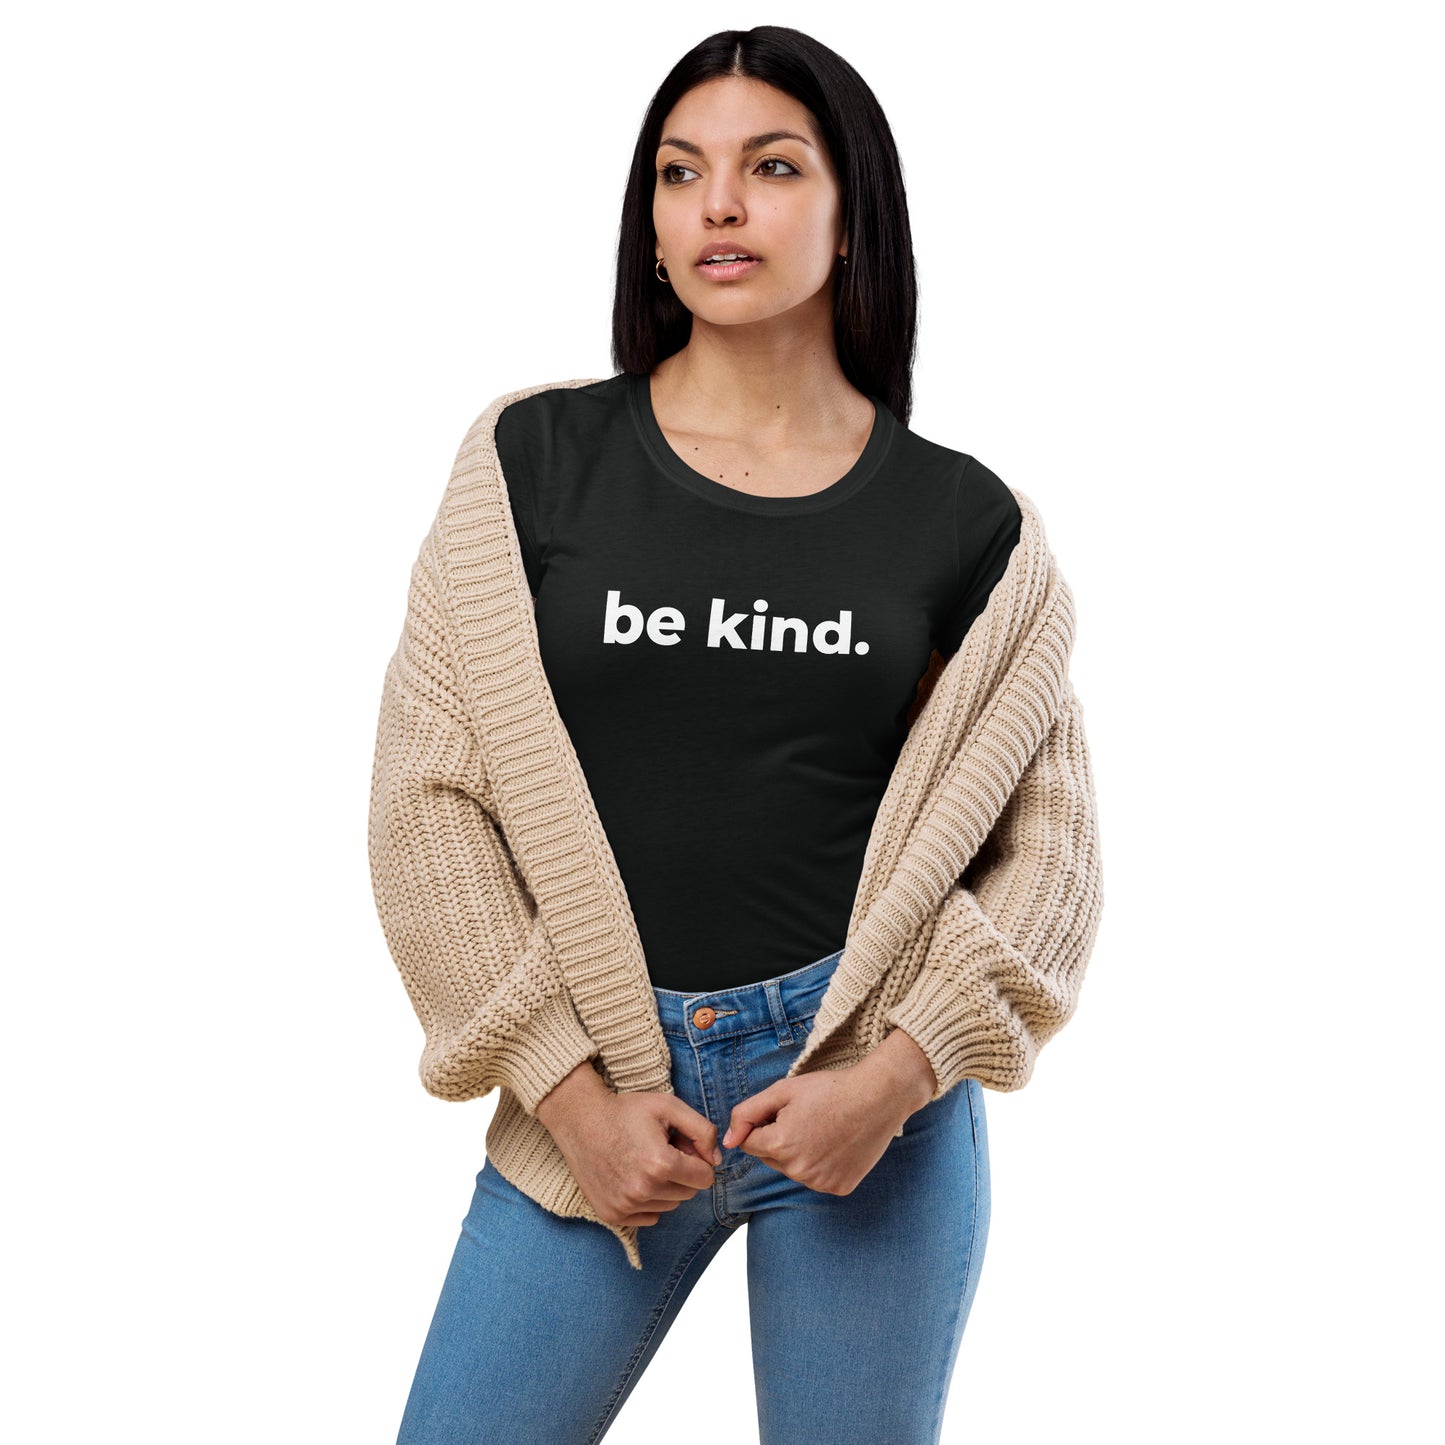 Be Kind - Women’s fitted t-shirt